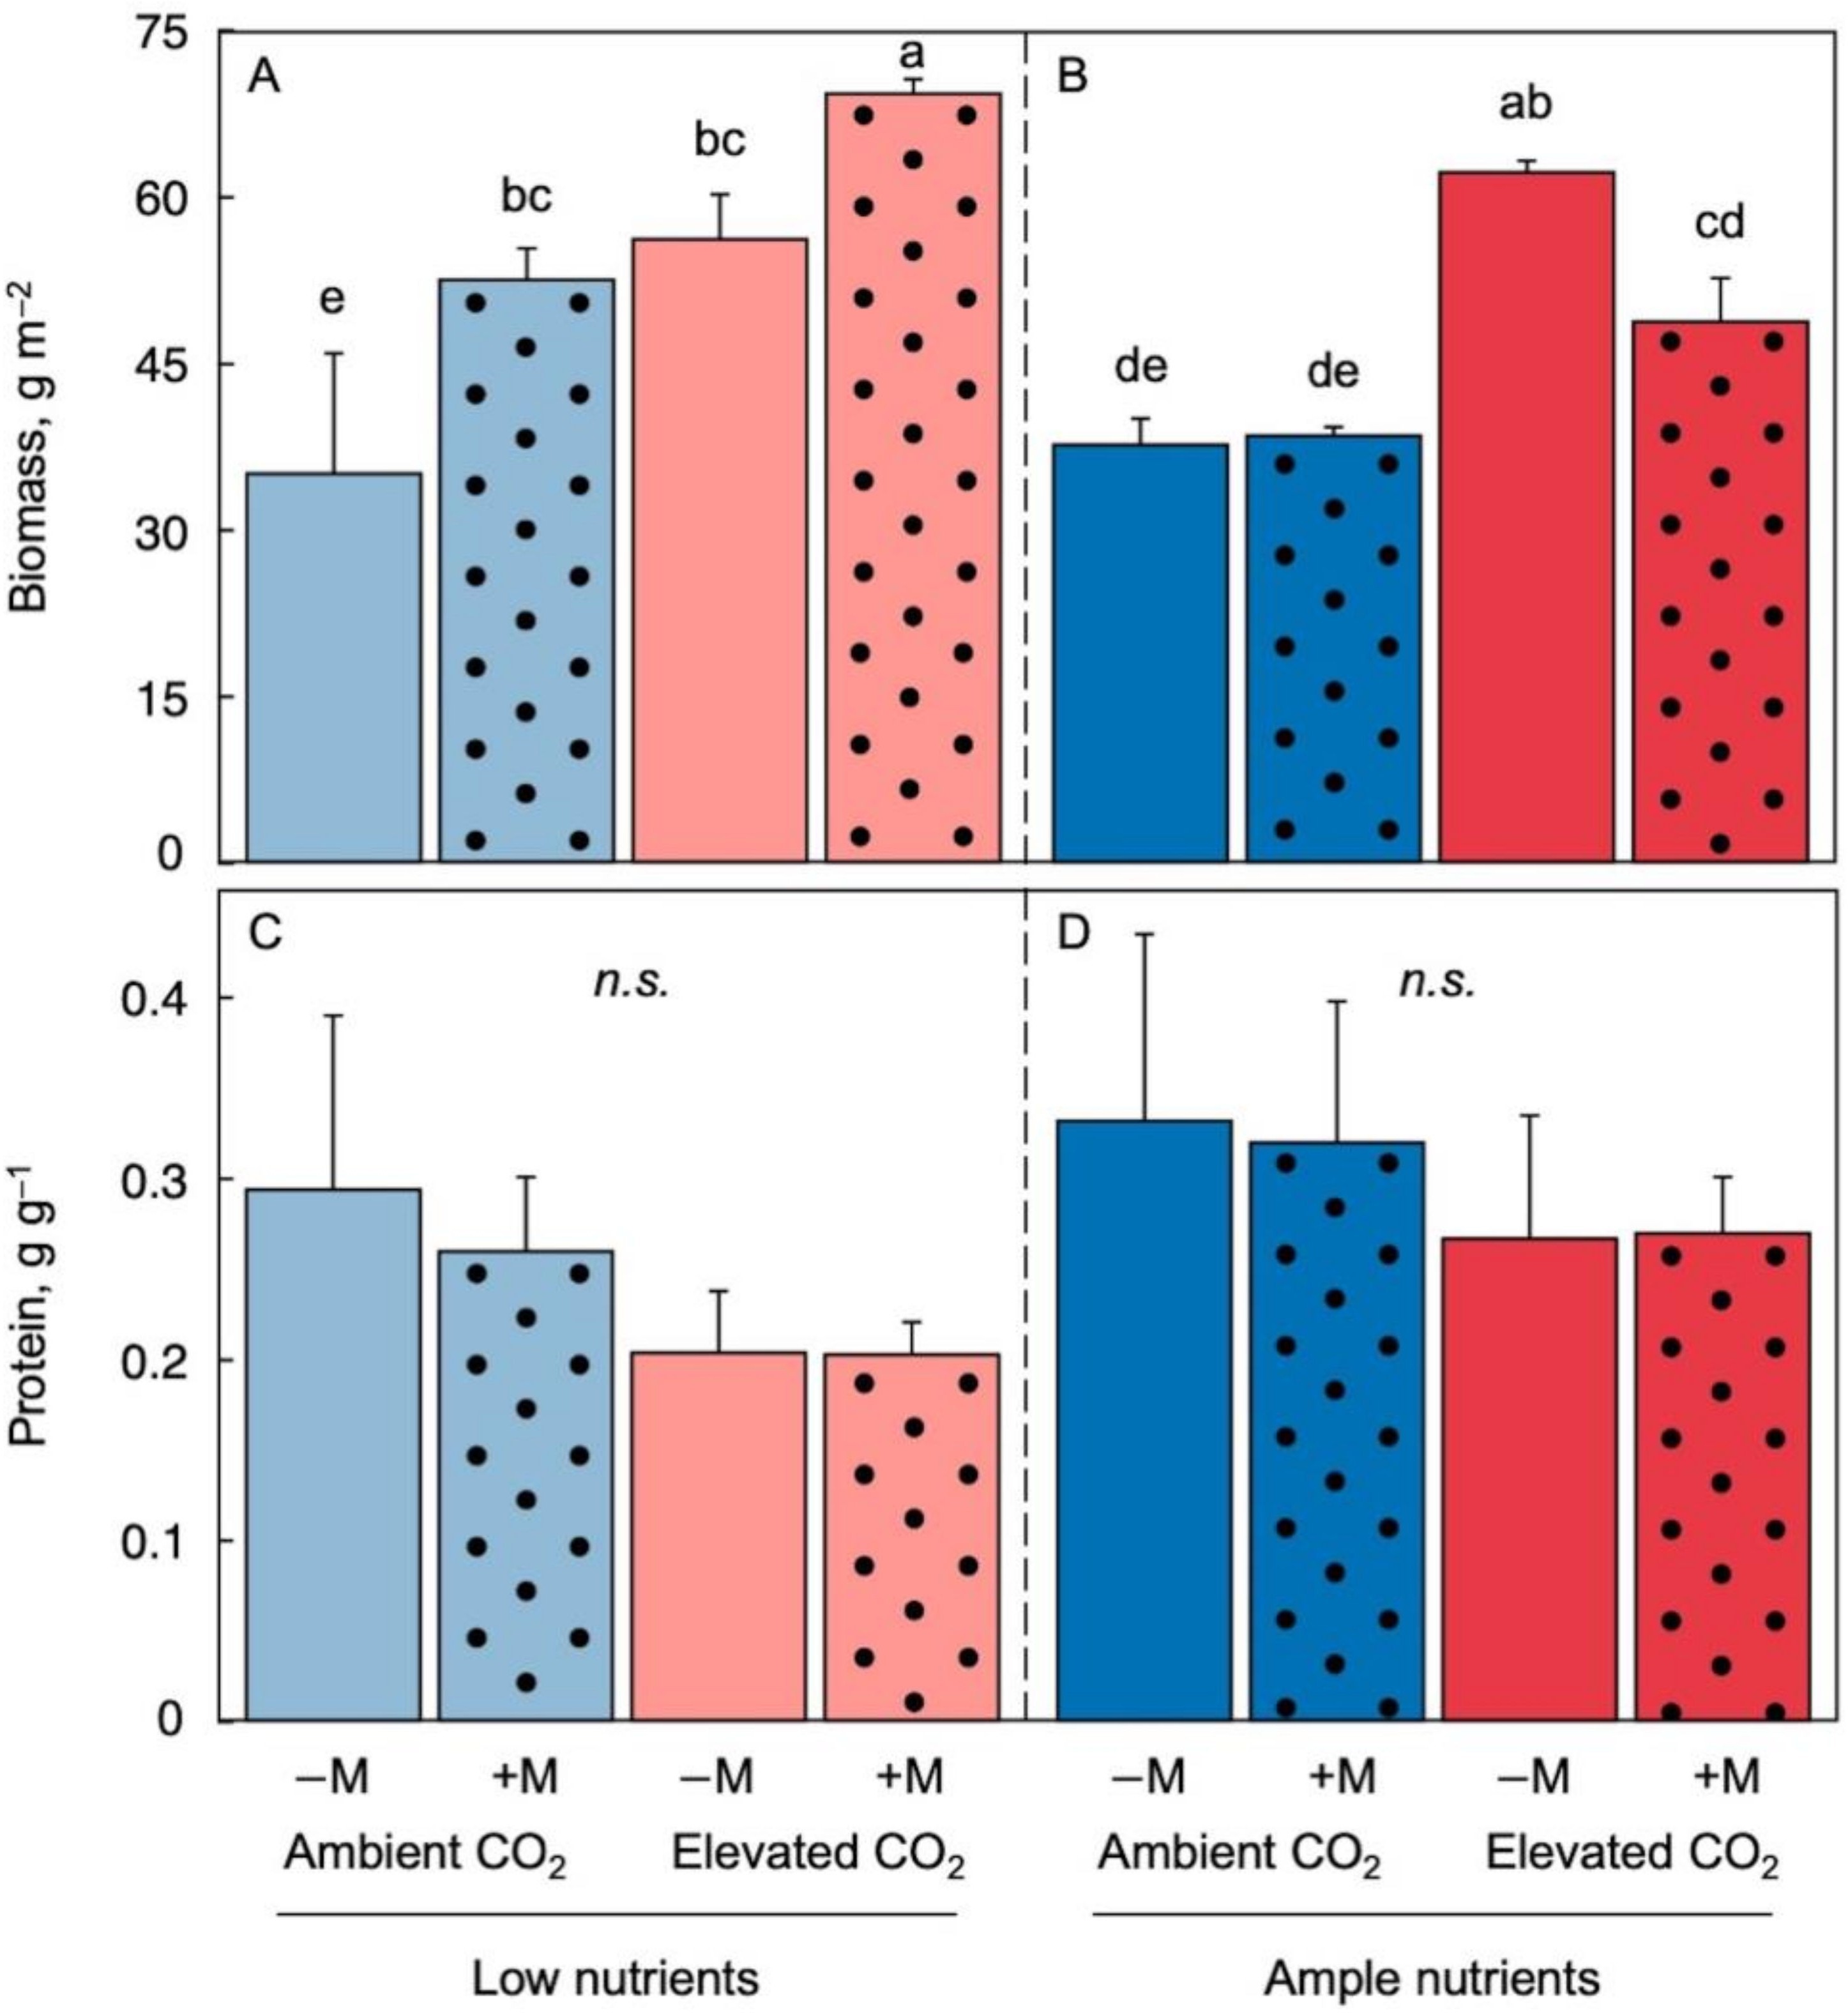 Figure 2. Dry biomass production per frond area under low (A) and ample (B) nutrients as well as protein to dry biomass ratio under low (C) and ample (D) nutrients for Lemna minor grown in 1/20 (light blue or light red) or 1/2 strength (dark blue or red) Schenk & Hildebrandt medium and either ambient (blue) or elevated (red) CO2 levels. Solid-fill columns represent fronds that were not inoculated (−M) and dotted columns plants that were inoculated (+M) with microorganisms from a pond with L. minor. Mean values ± standard deviations; n = 3. Different lower-case letters represent significant differences at p < 0.05.